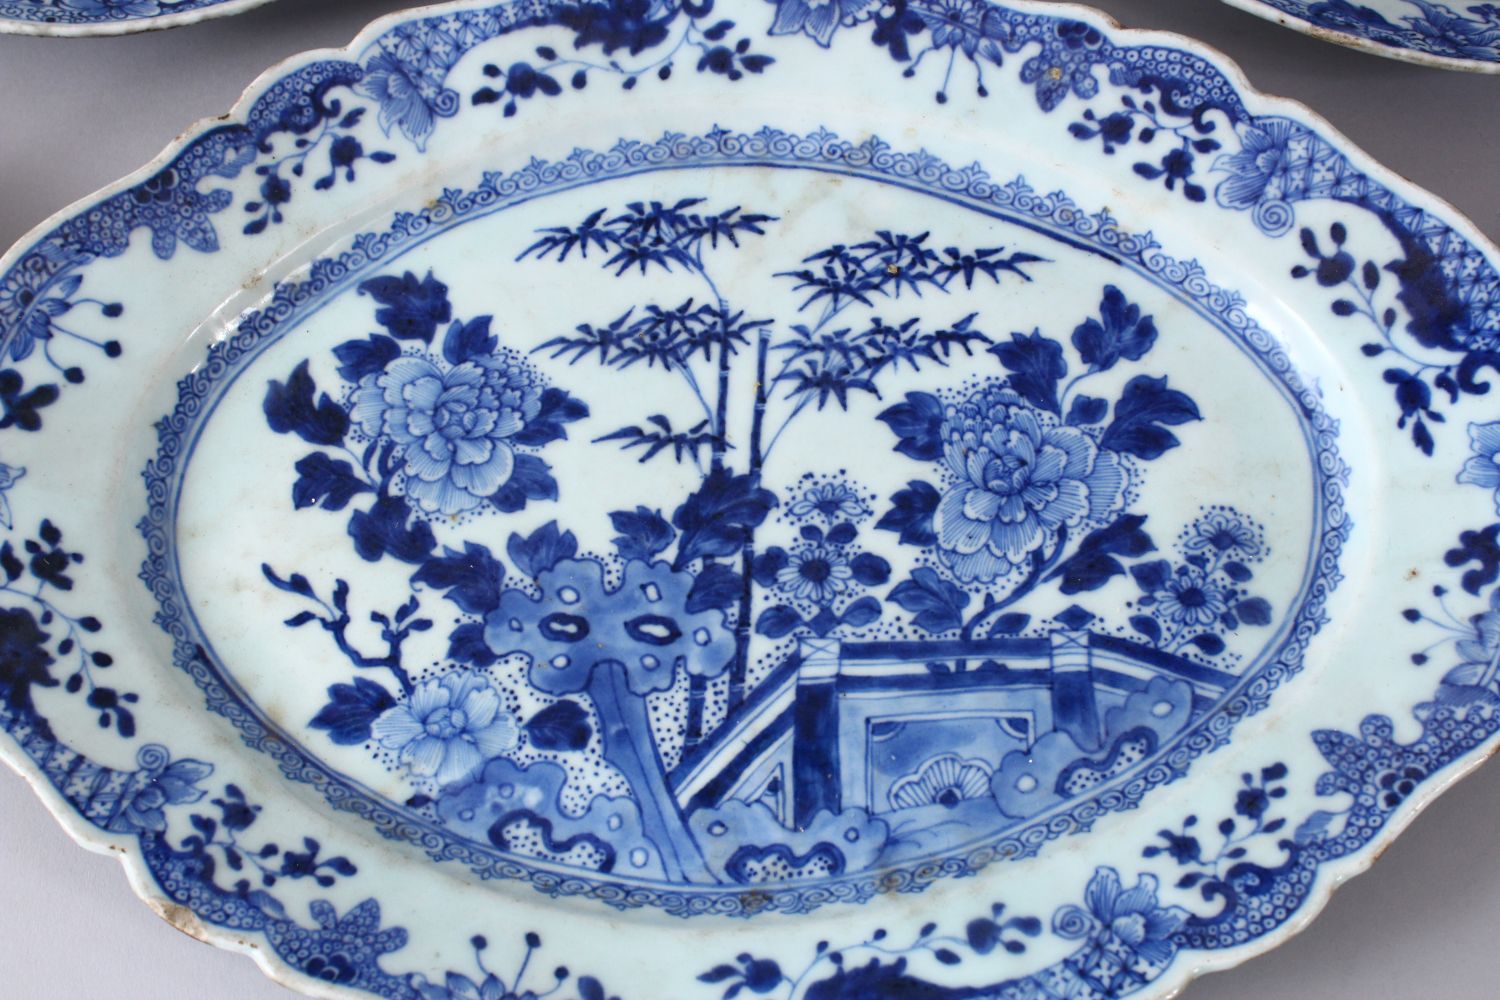 FIVE 18TH CENTURY CHINESE BLUE & WHITE PORCELAIN SERVING DISHES, each with a varying display of - Image 3 of 7